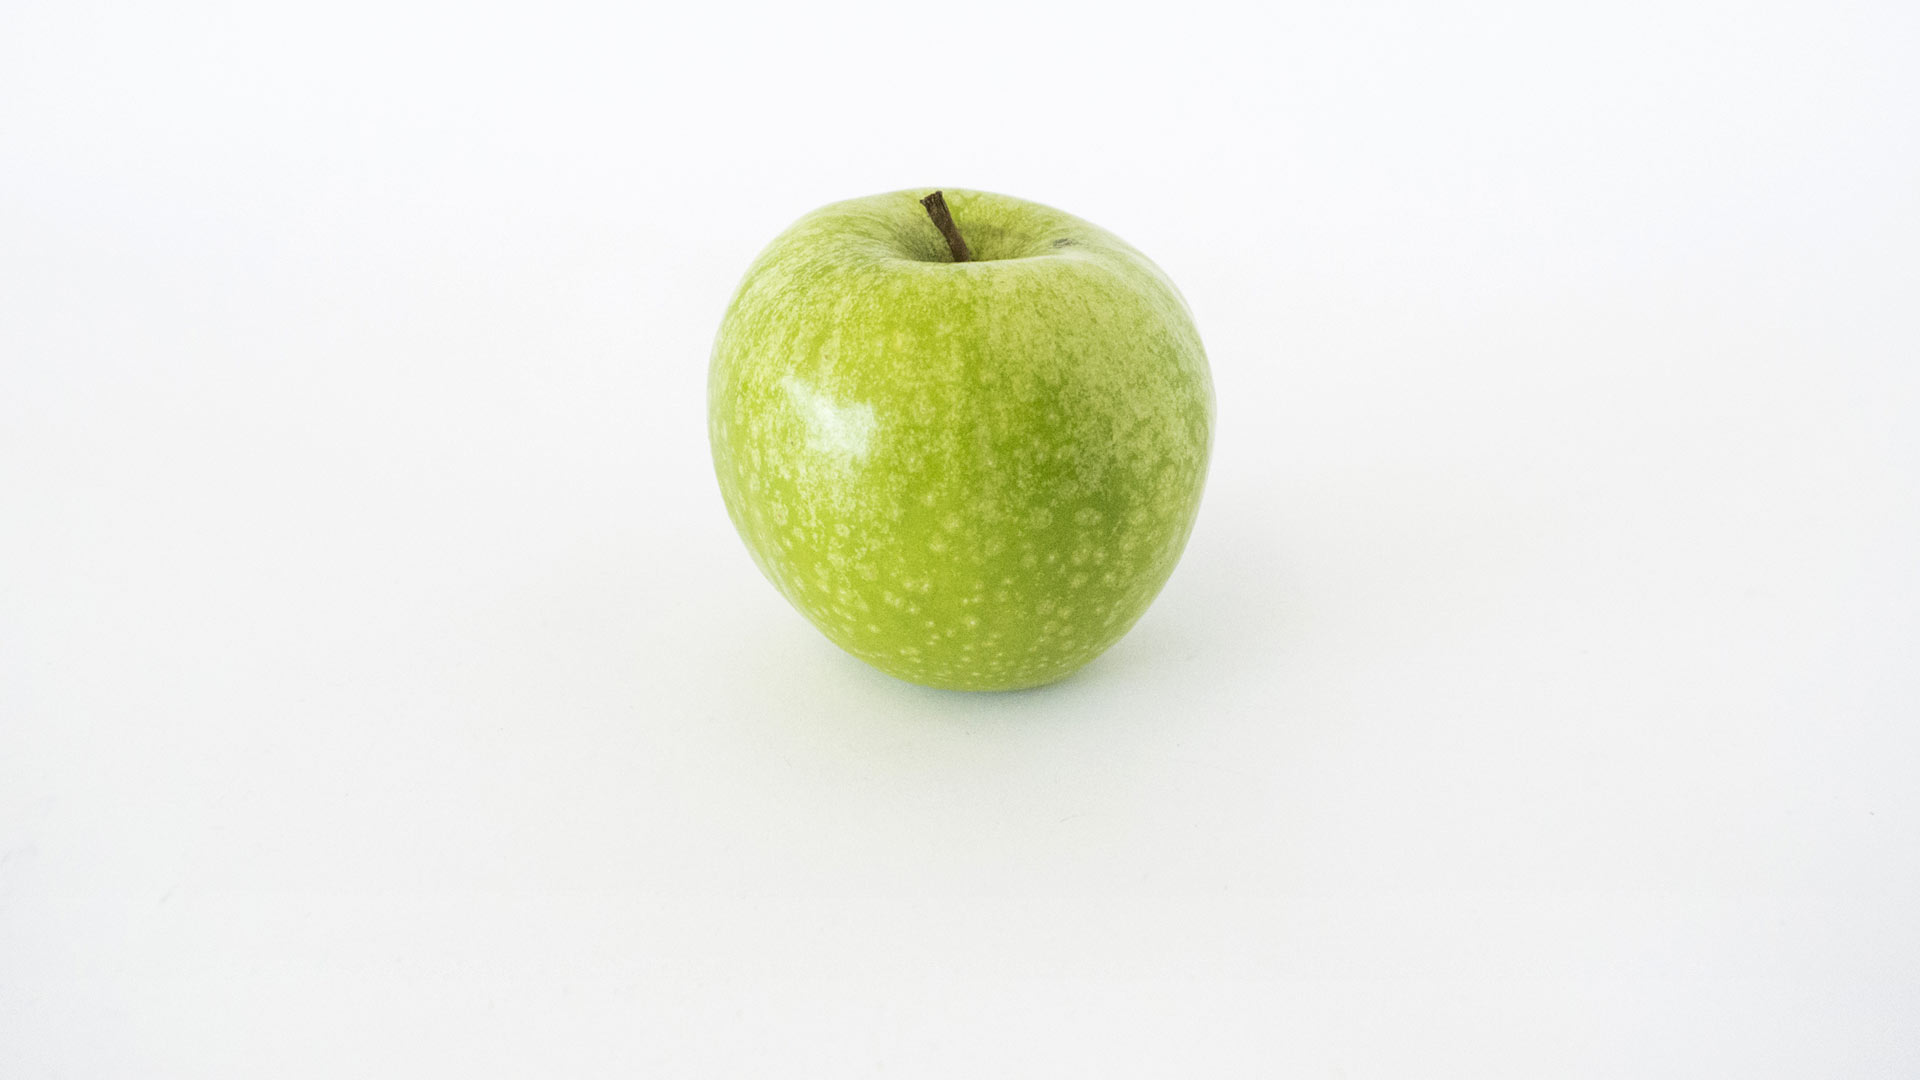 A photograph of a fresh green apple isolated against a white background